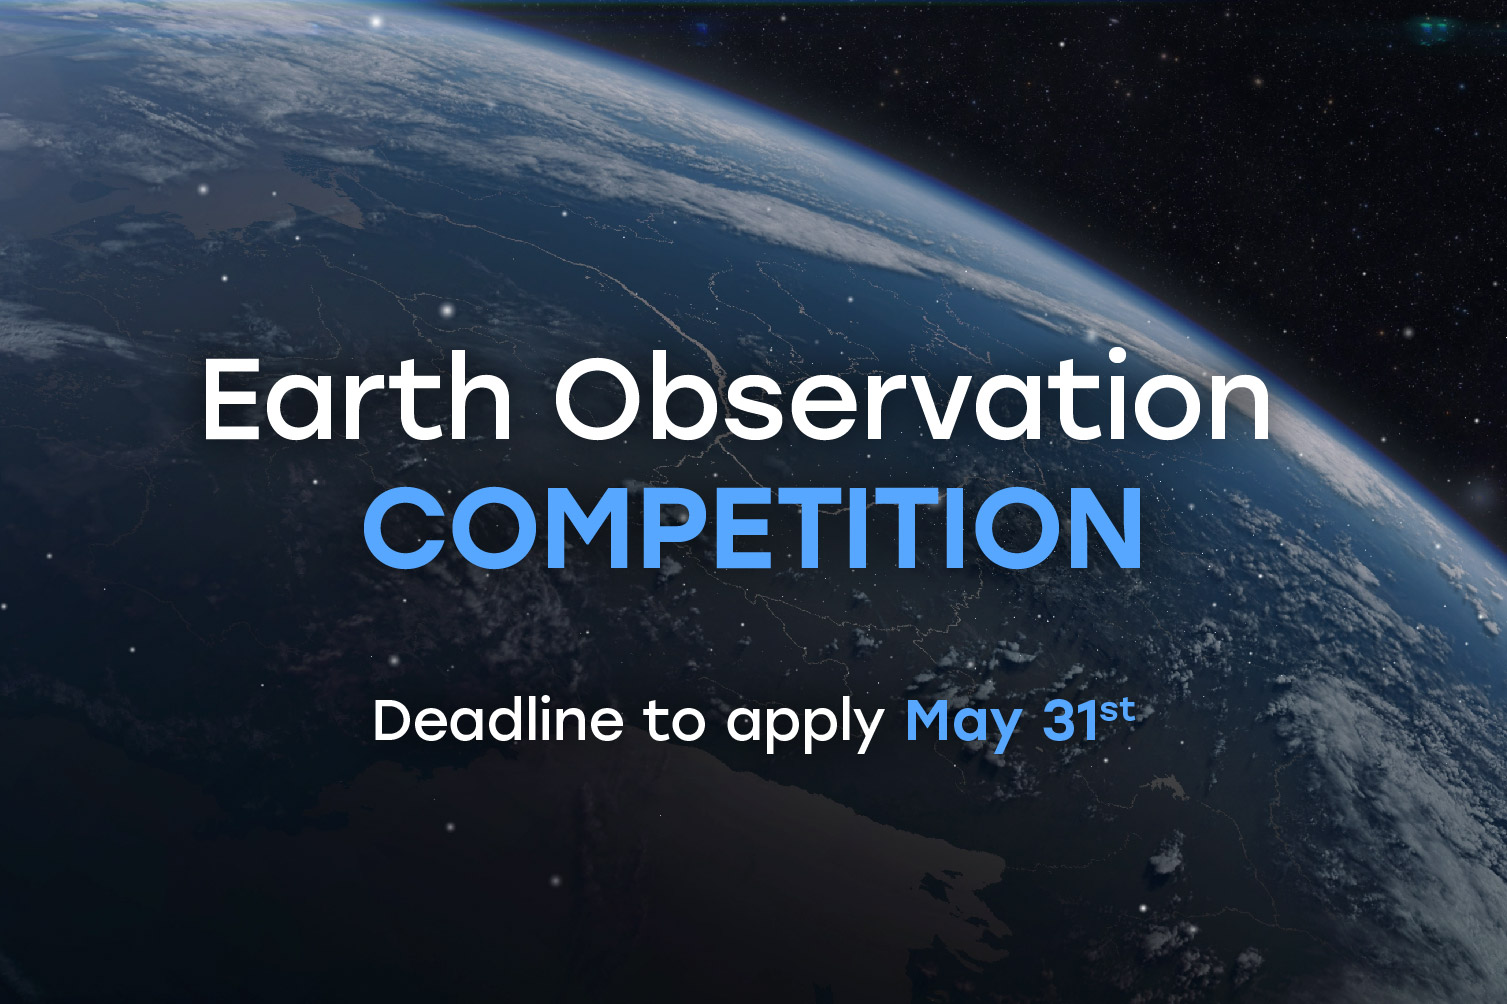 Azercosmos announces a new competition